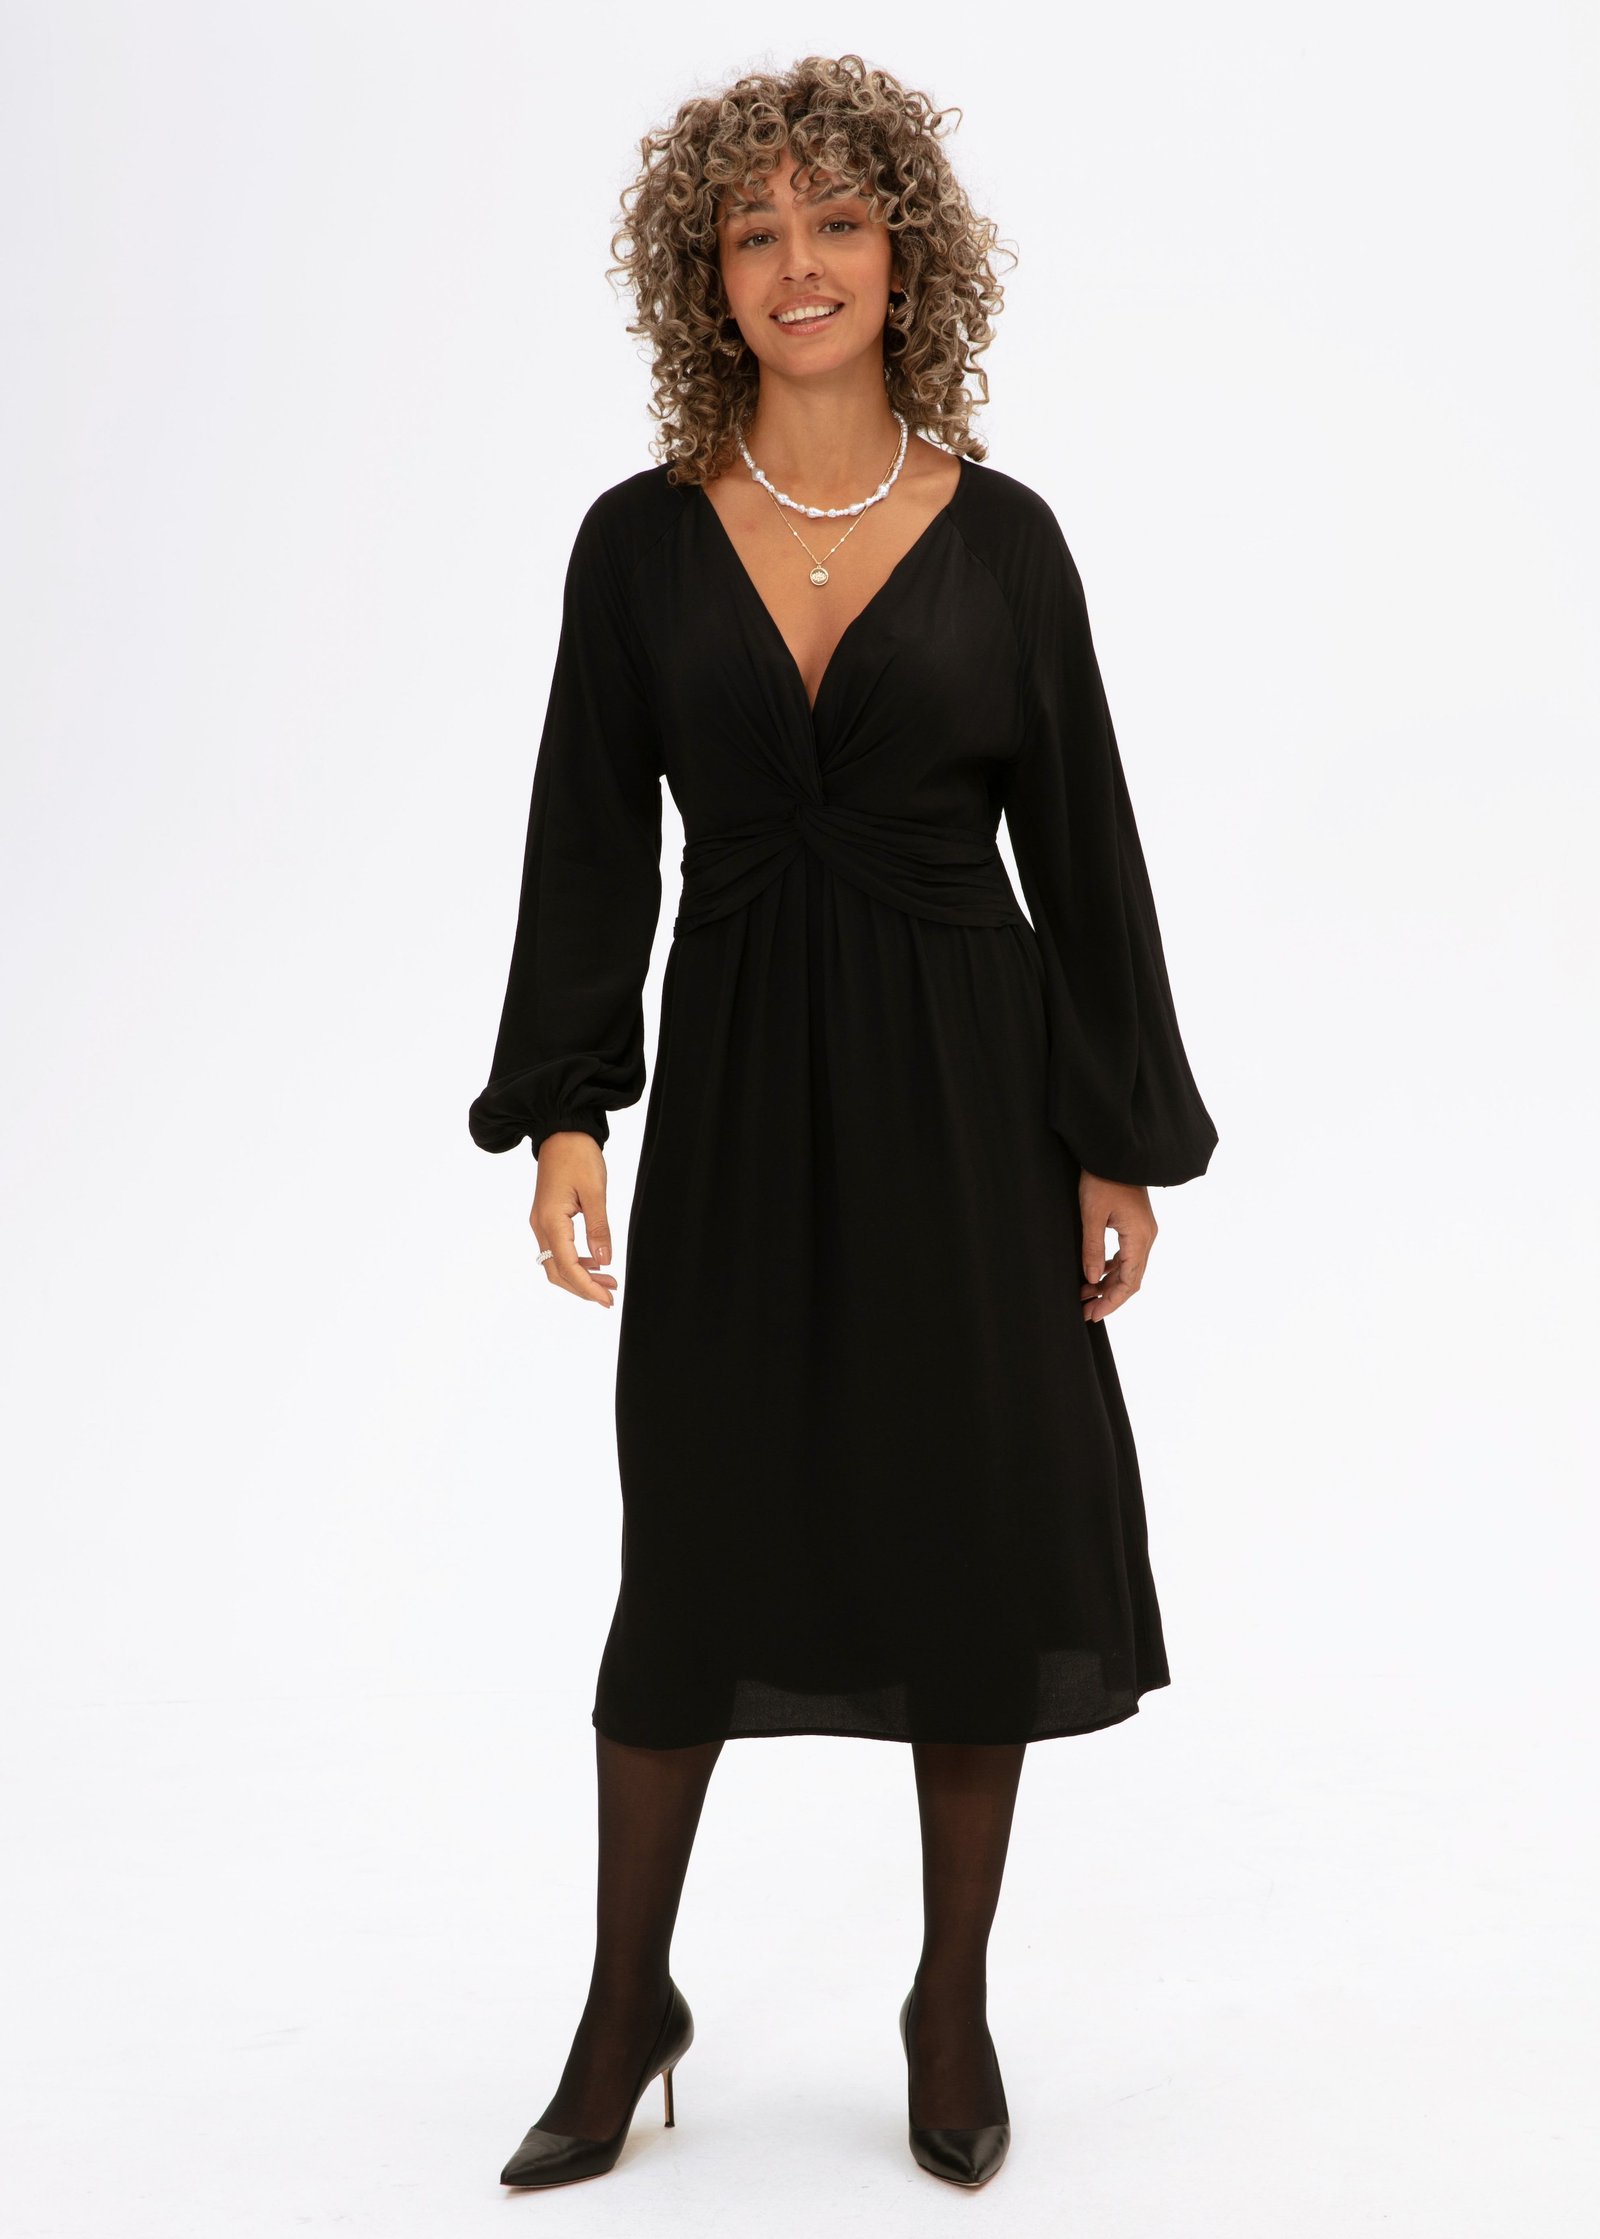 Black dress with puff sleeves Image 2